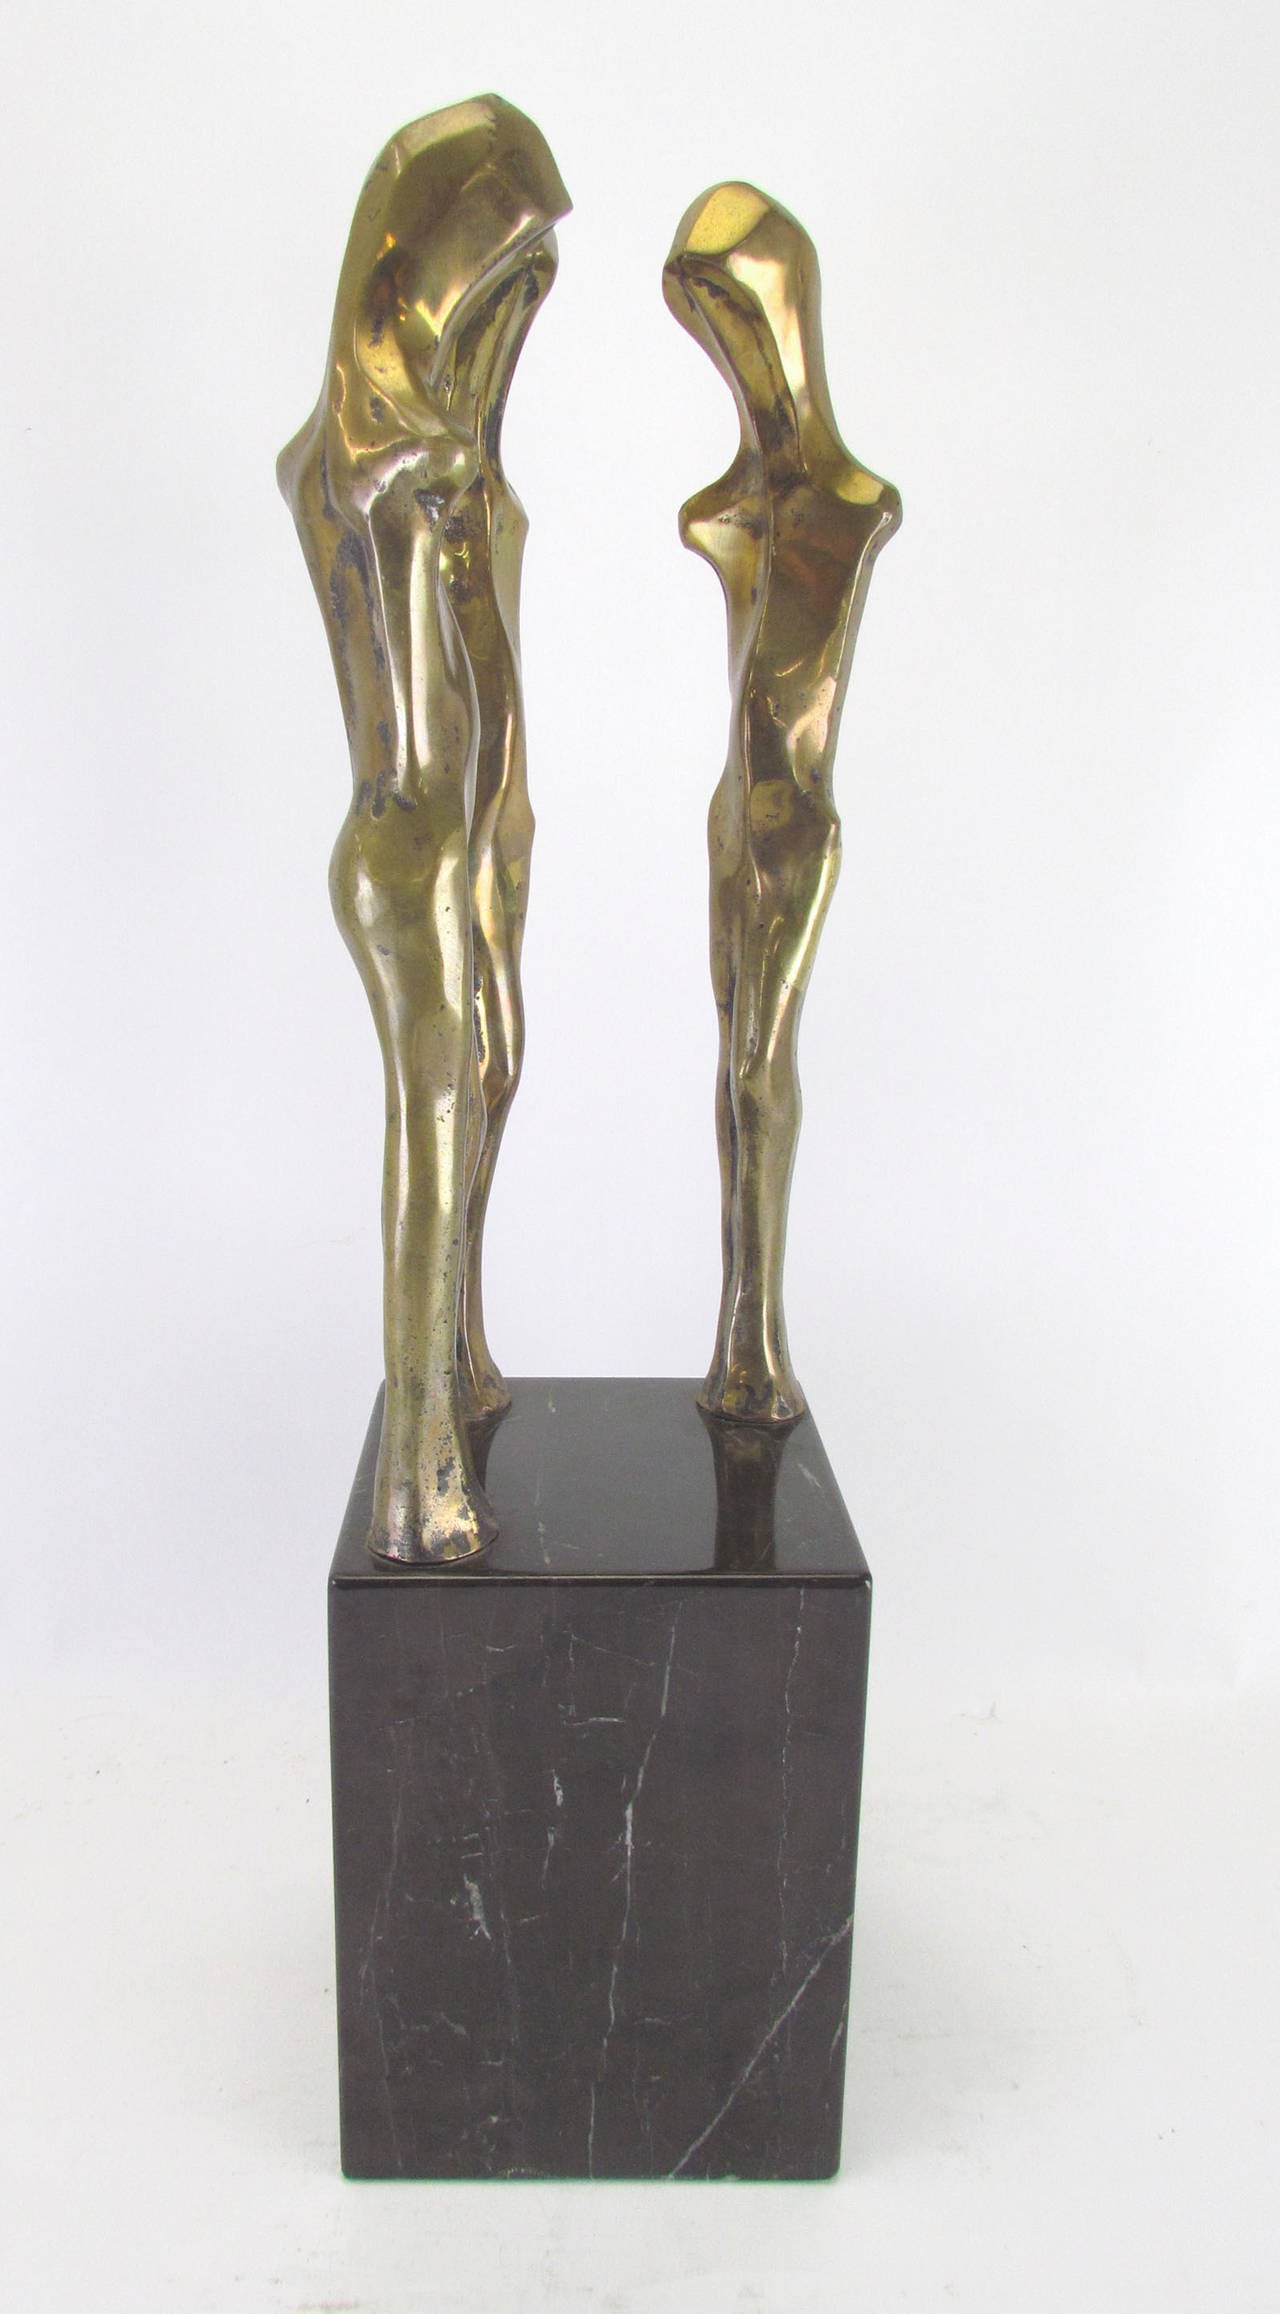 Abstract Figural Modernist Sculpture in Bronze and Marble, Signed Davidson 1